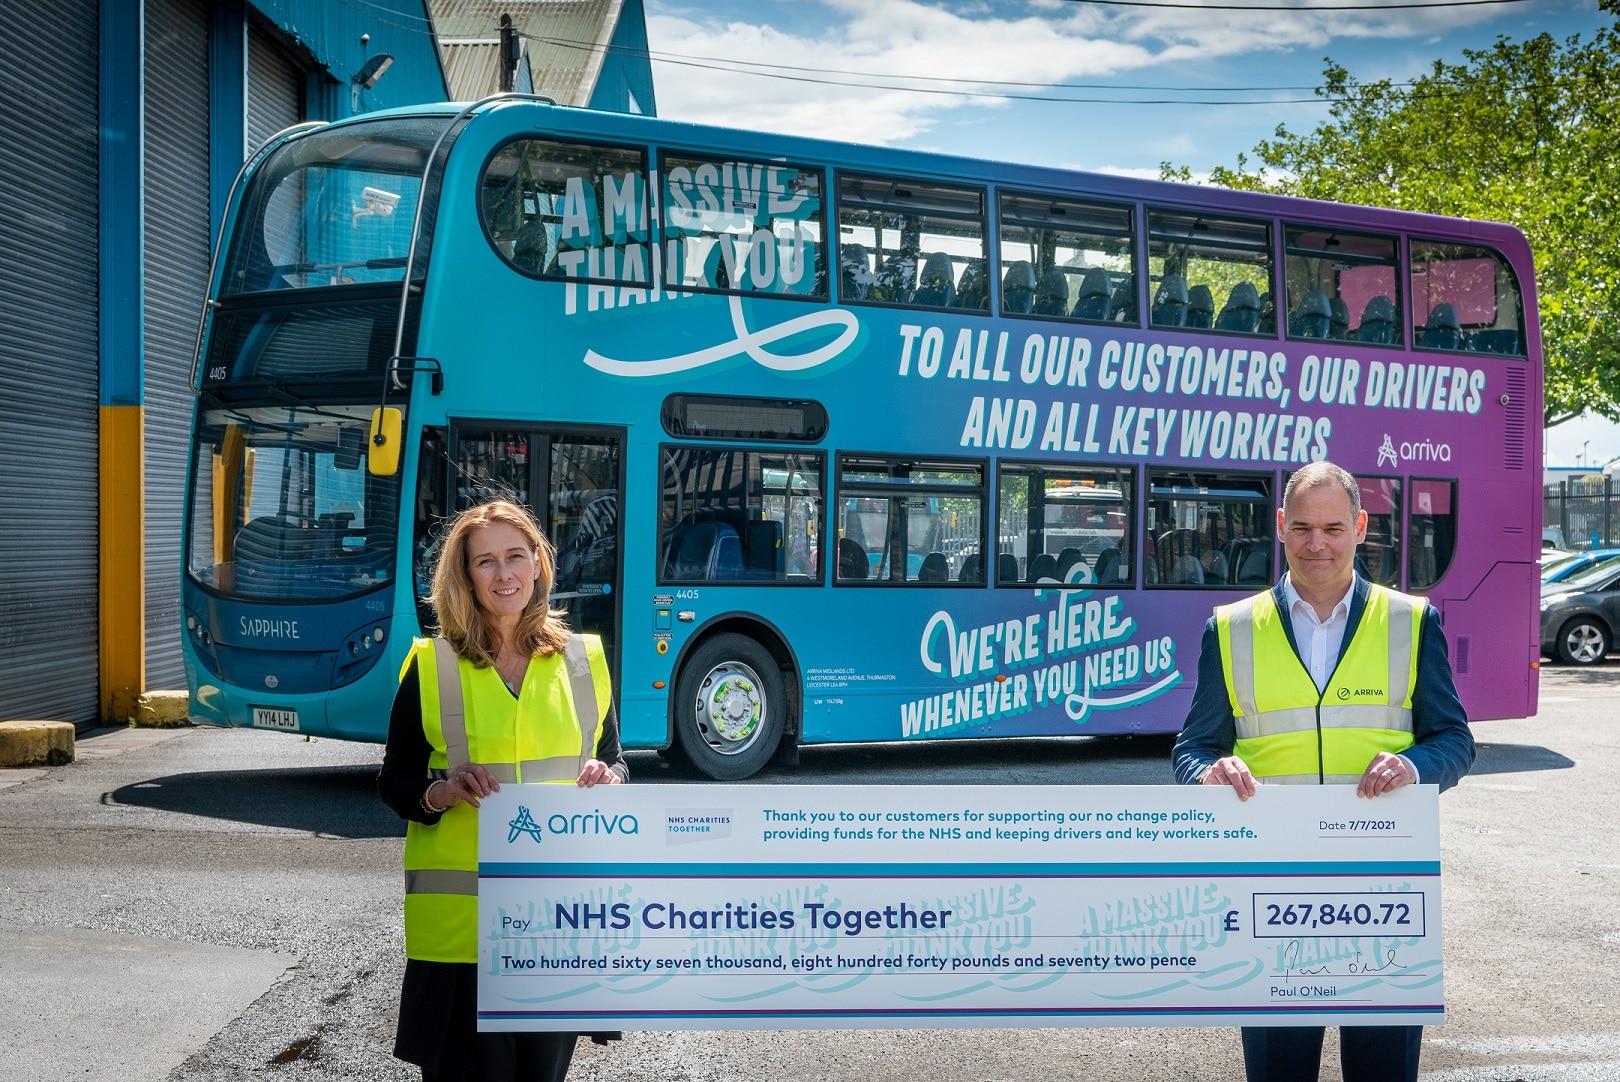 Arriva exact fare policy leads to NHS charity donation